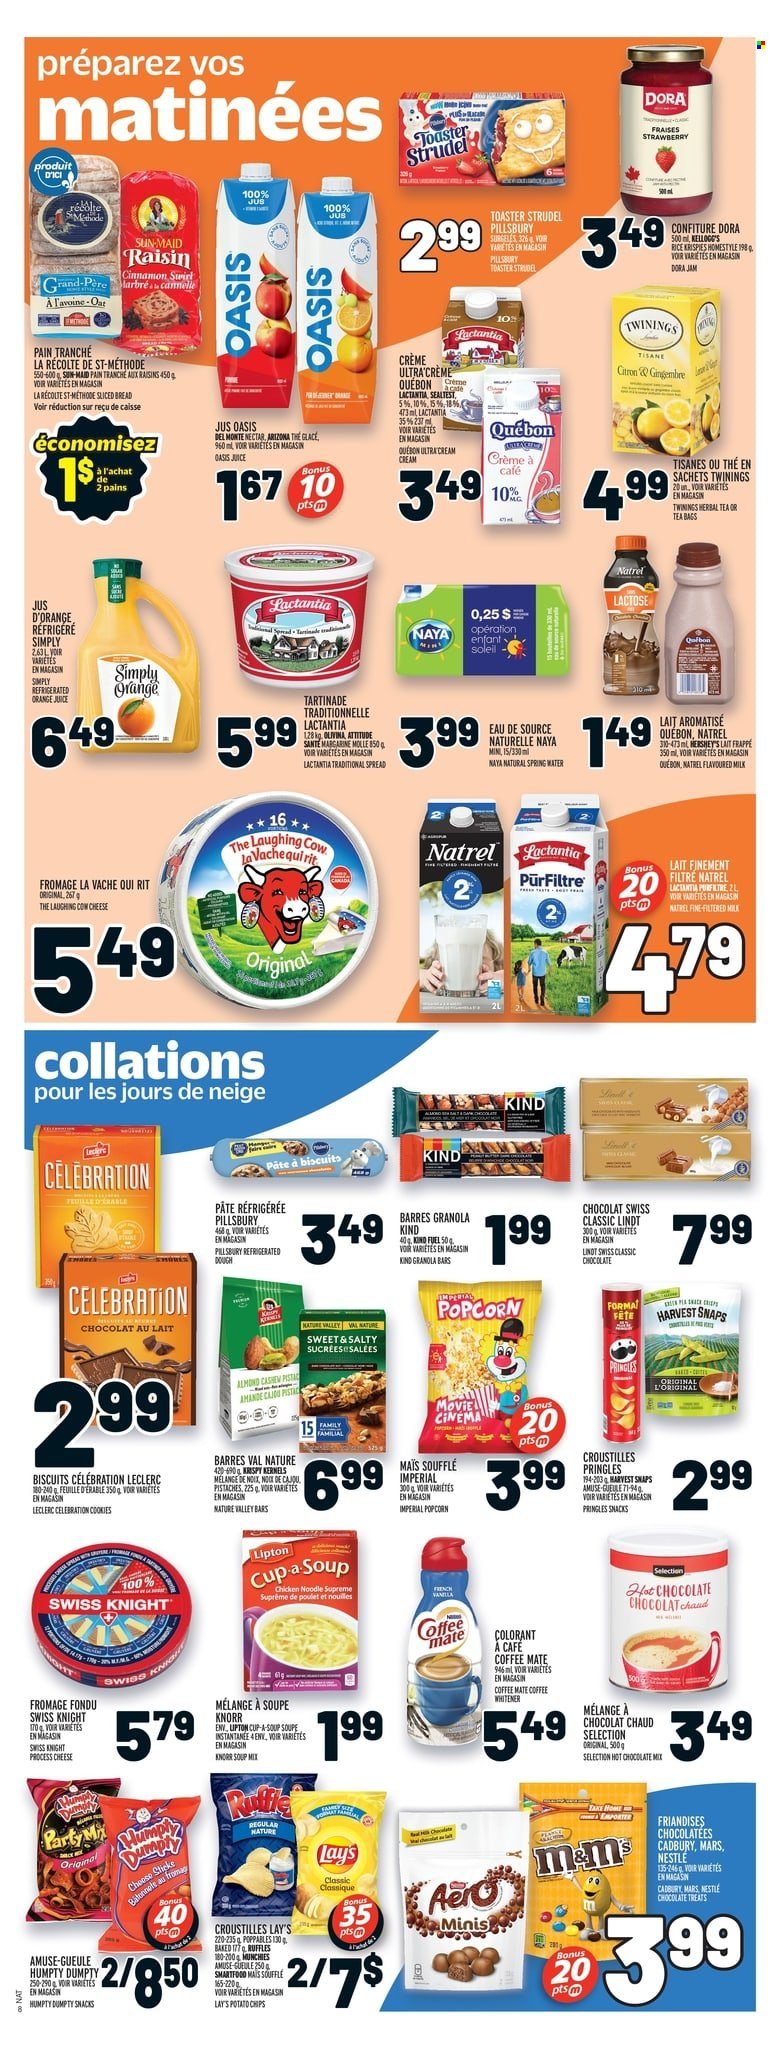 thumbnail - Metro Flyer - January 26, 2023 - February 01, 2023 - Sales products - bread, strudel, soup mix, soup, Pillsbury, noodles, cheese, The Laughing Cow, Coffee-Mate, milk, flavoured milk, margarine, Hershey's, cookies, snack, Mars, Celebration, Kellogg's, biscuit, Cadbury, potato chips, Pringles, chips, Lay’s, Smartfood, popcorn, Ruffles, oats, Harvest Snaps, Del Monte, granola bar, Rice Krispies, Nature Valley, cinnamon, fruit jam, dried fruit, orange juice, juice, AriZona, spring water, hot chocolate, tea, herbal tea, Twinings, cup, Nestlé, raisins, Lipton, Knorr, Lindt, M&M's. Page 7.